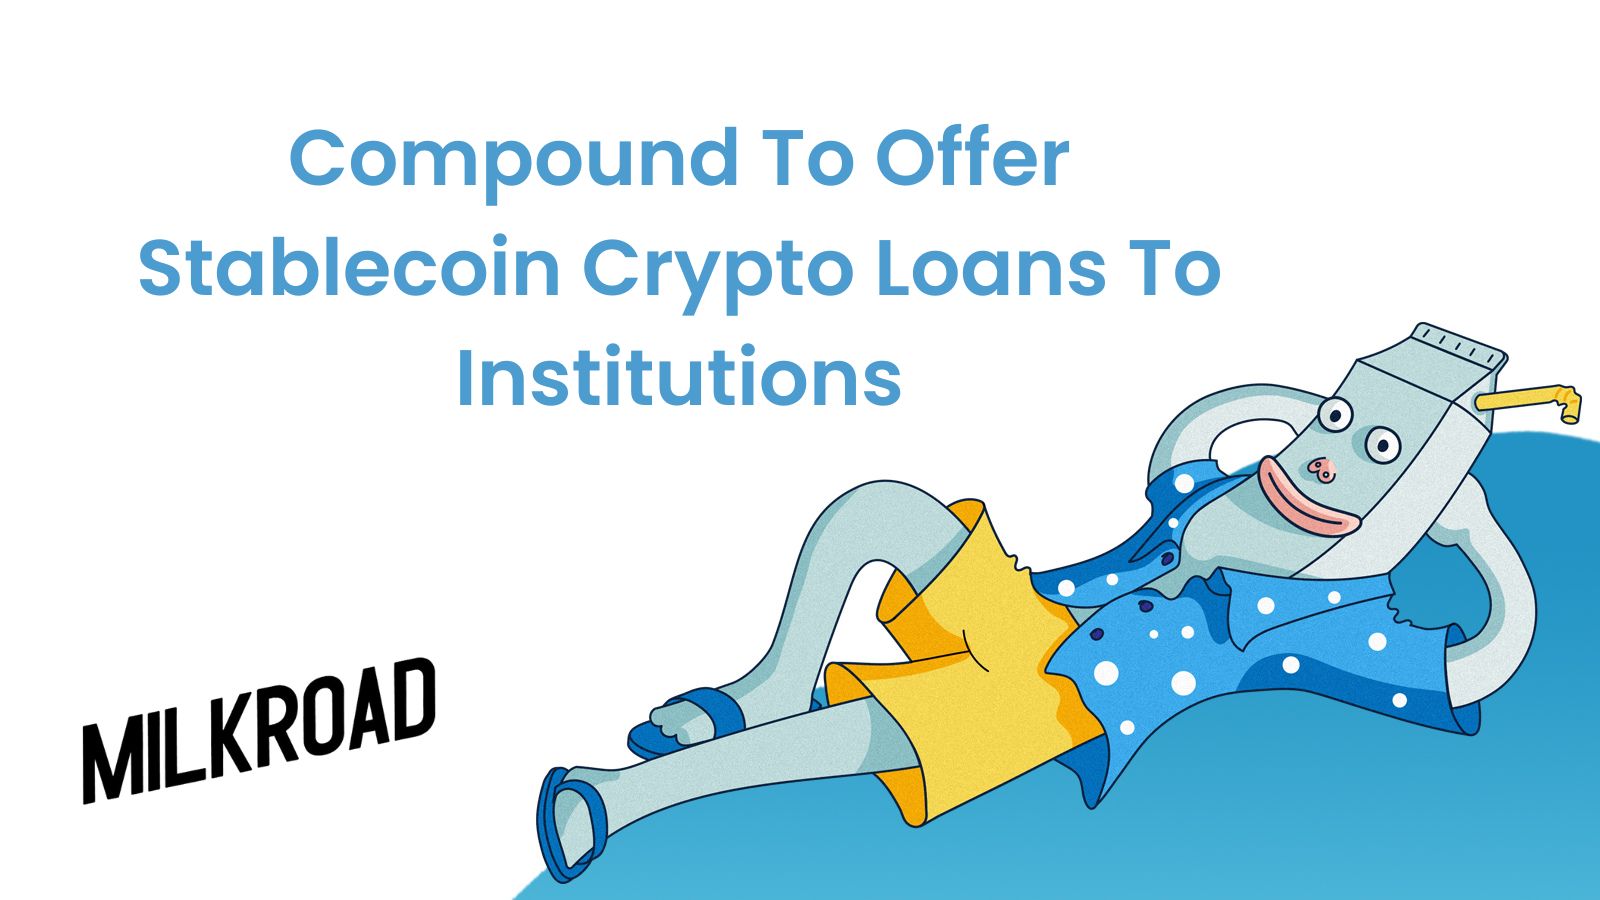 Compound To Offer Stablecoin Crypto Loans To Institutions